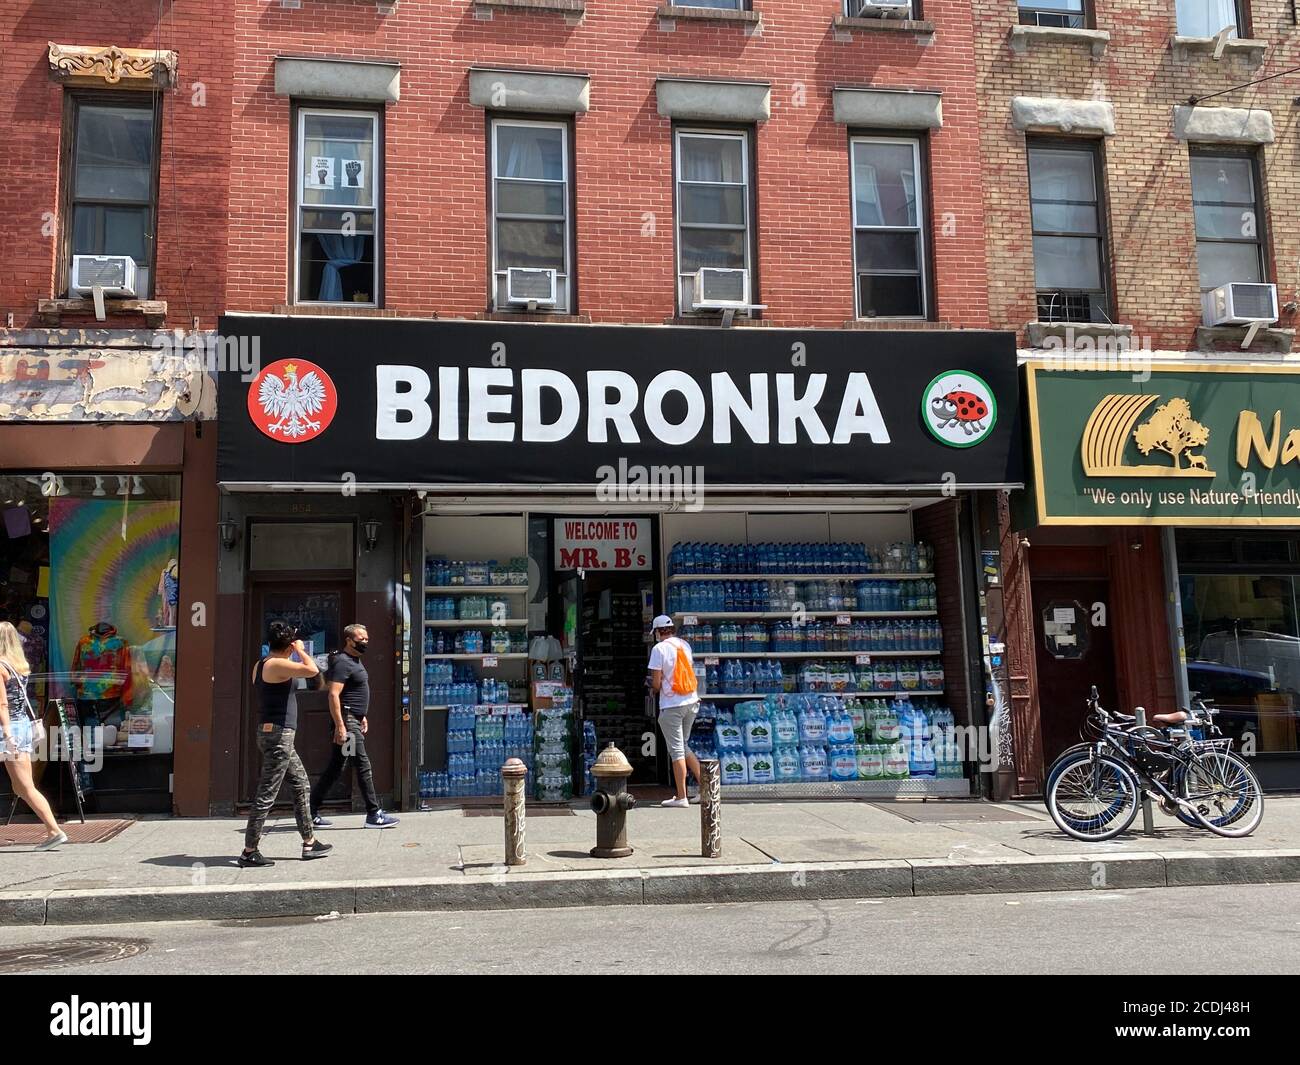 Biedronka is a grocery market chain from Portugal. This one is in the  Greenpoint neighborhood of Brooklyn, traditionally a Polish neighborhood.  Biedronka has many stores across Poland making the market familiar to